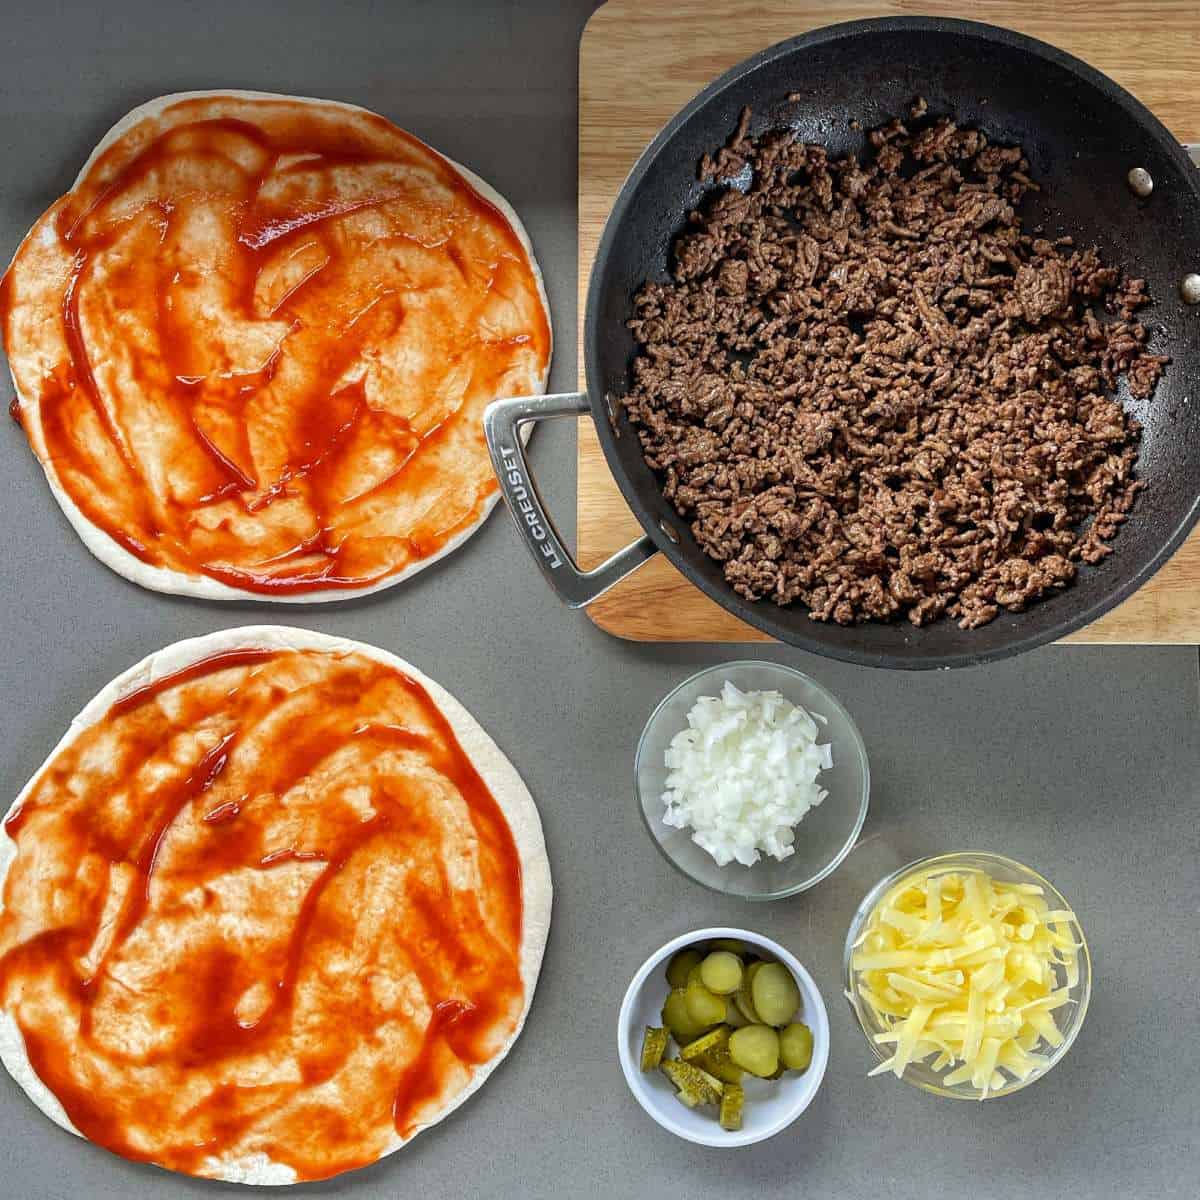 Two pizza bases with tomato sauce spread on them next to a frying pan with mince in it and three small bowls with cheese, onion and gherkins in them.